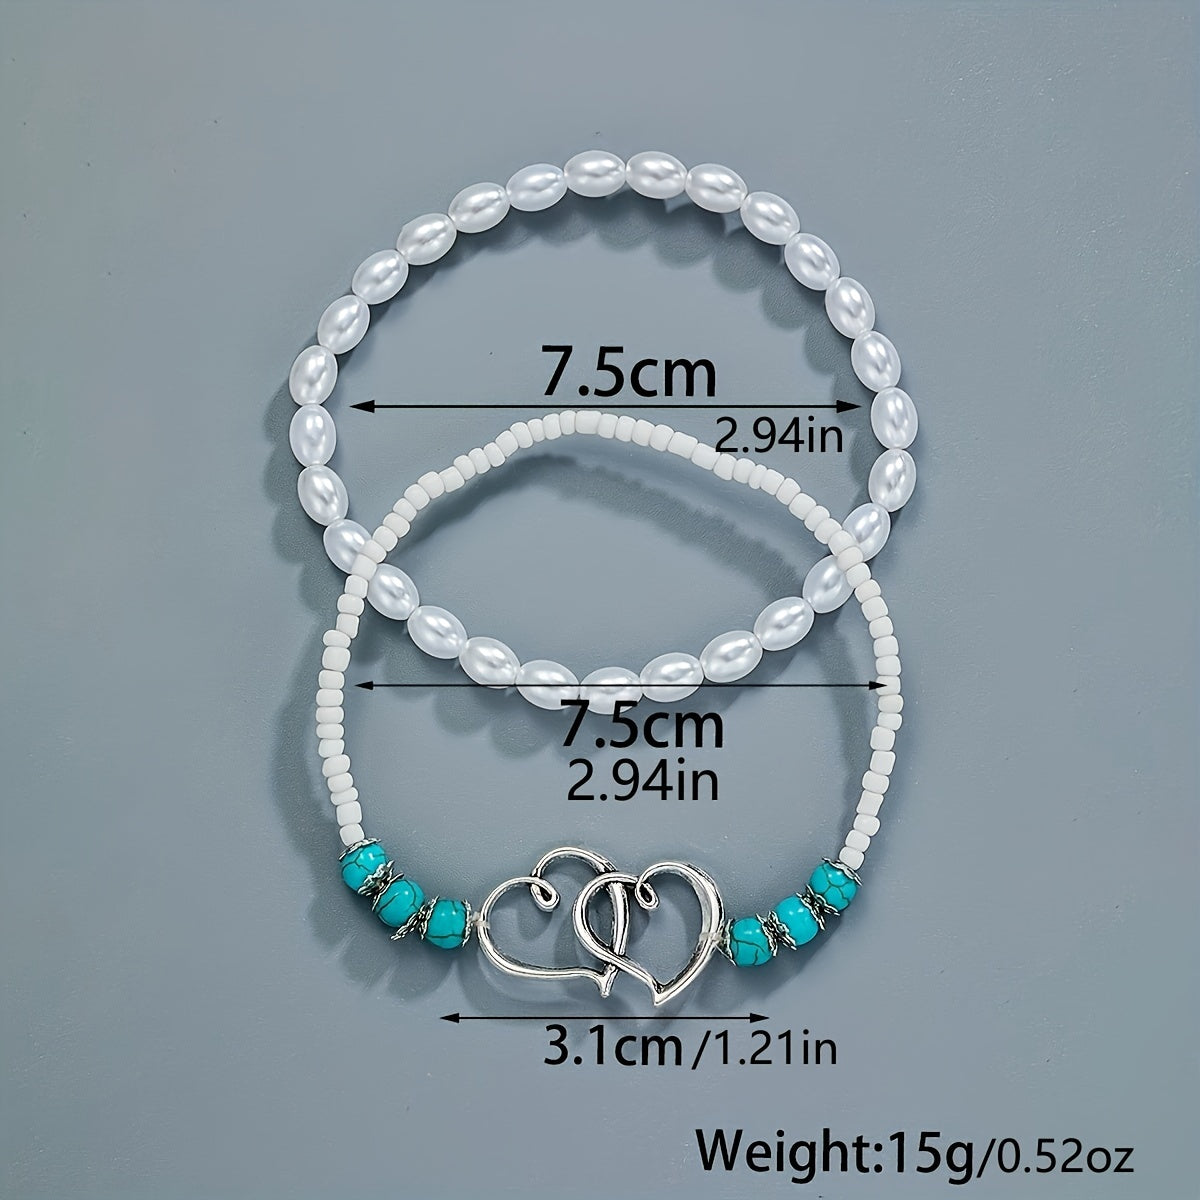 Double Hollow Out Love Heart Beaded Anklet Set With Faux Pearls Turquoise Beads Stackable Ankle Bracelet